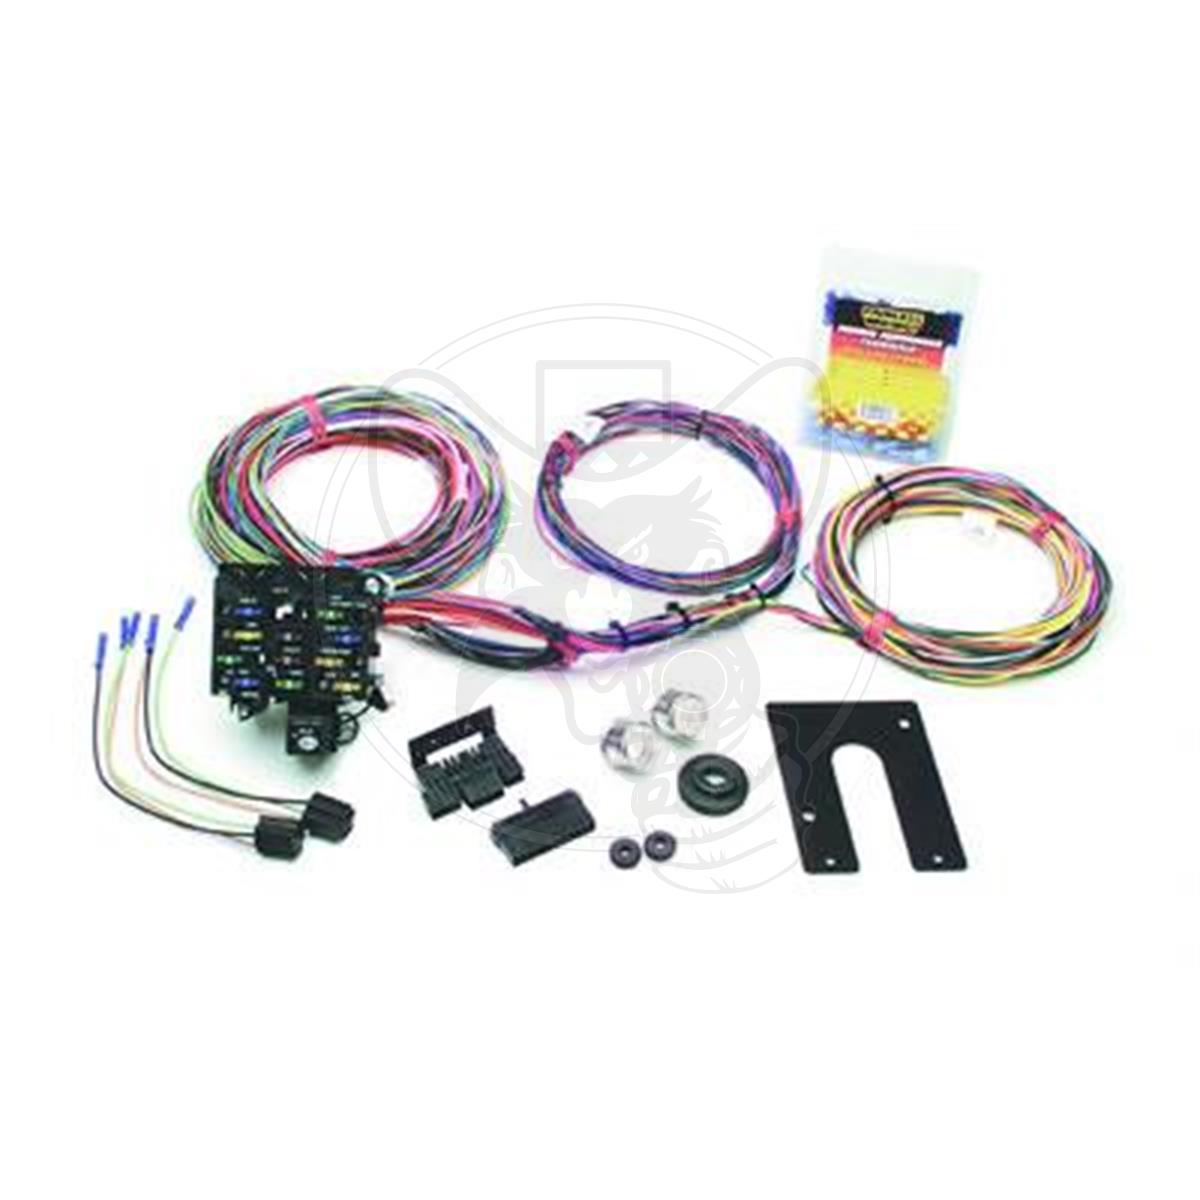 PAINLESS WIRING HARNESS KIT 12-CIRCUIT KIT FITS HOLDENS UP TO HZ